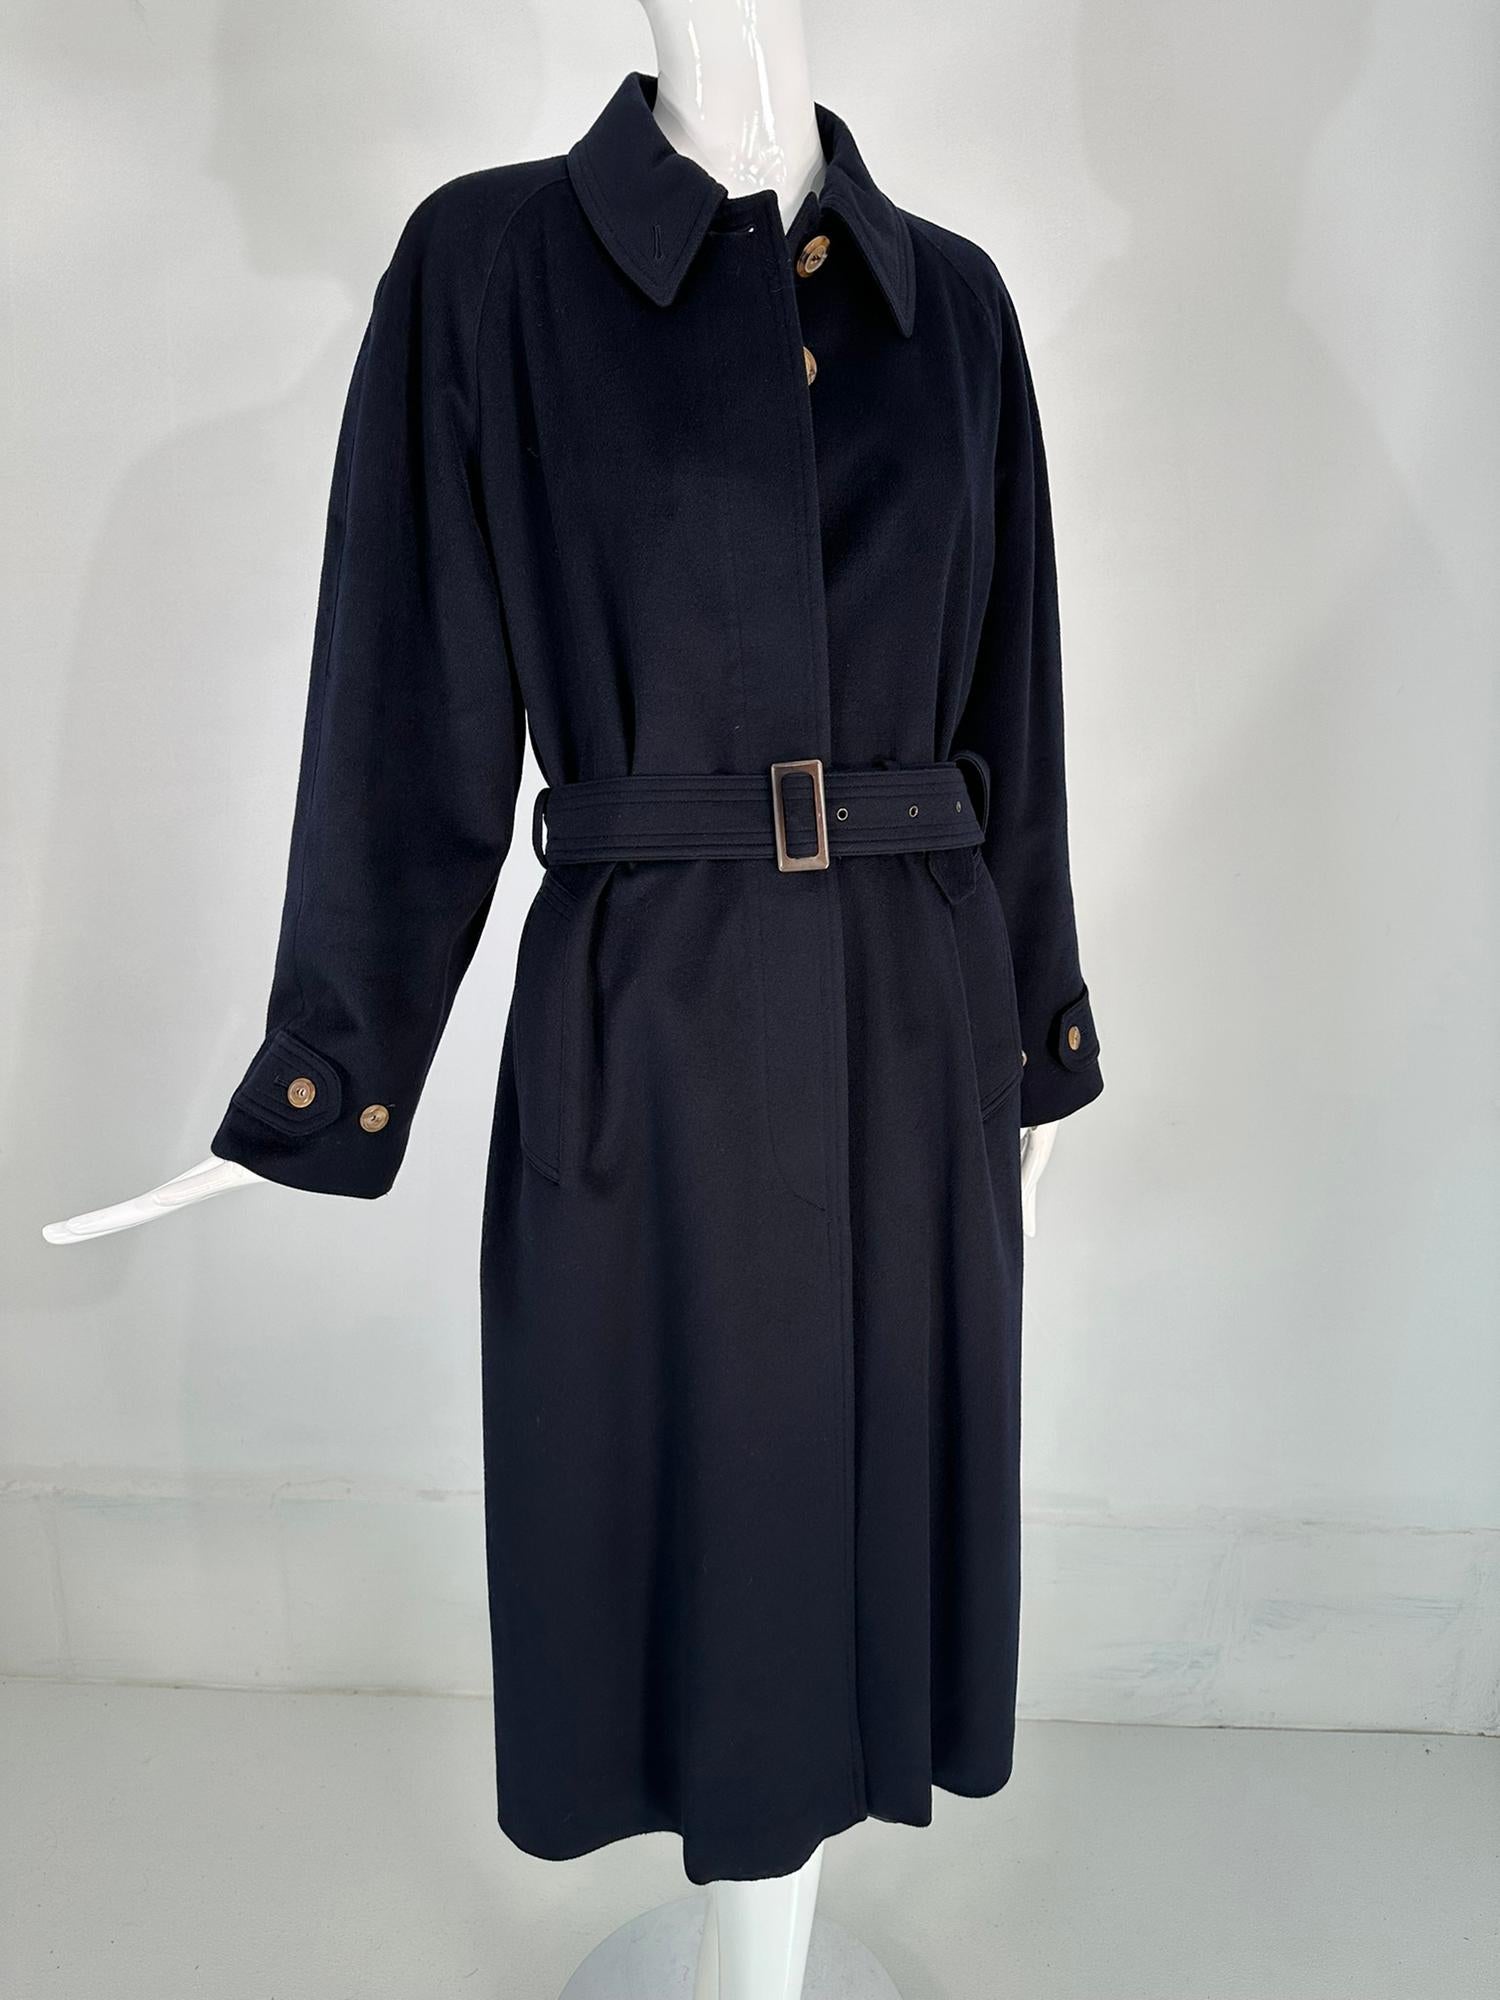 Giorgio Armani Classico, Black Label, navy blue cashmere over coat. Dark navy cashmere coat with tab & adjustable button cuffs, long raglan sleeves. The coat closes at the front with a placket & hidden buttons to the neck. There are shaped flange